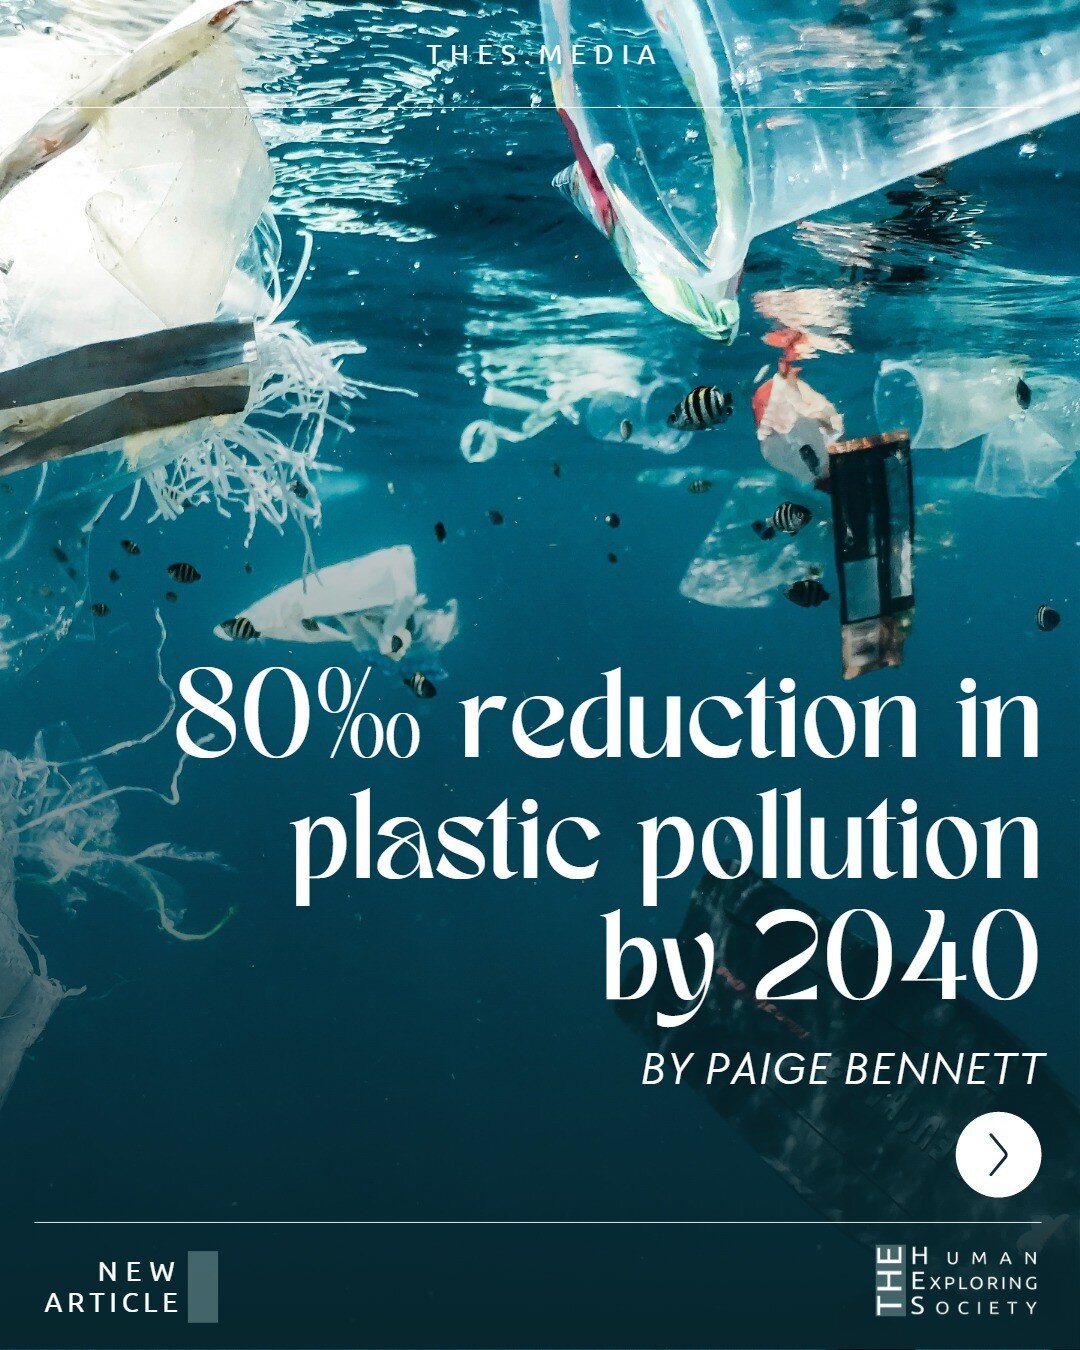 Without action, plastic consumption could double by 2050.

The need for immediate, rapid, and large-scale reductions in the use of plastics cannot be emphasized enough.

But individual actions cannot solve this crisis. 
We must focus our attention on